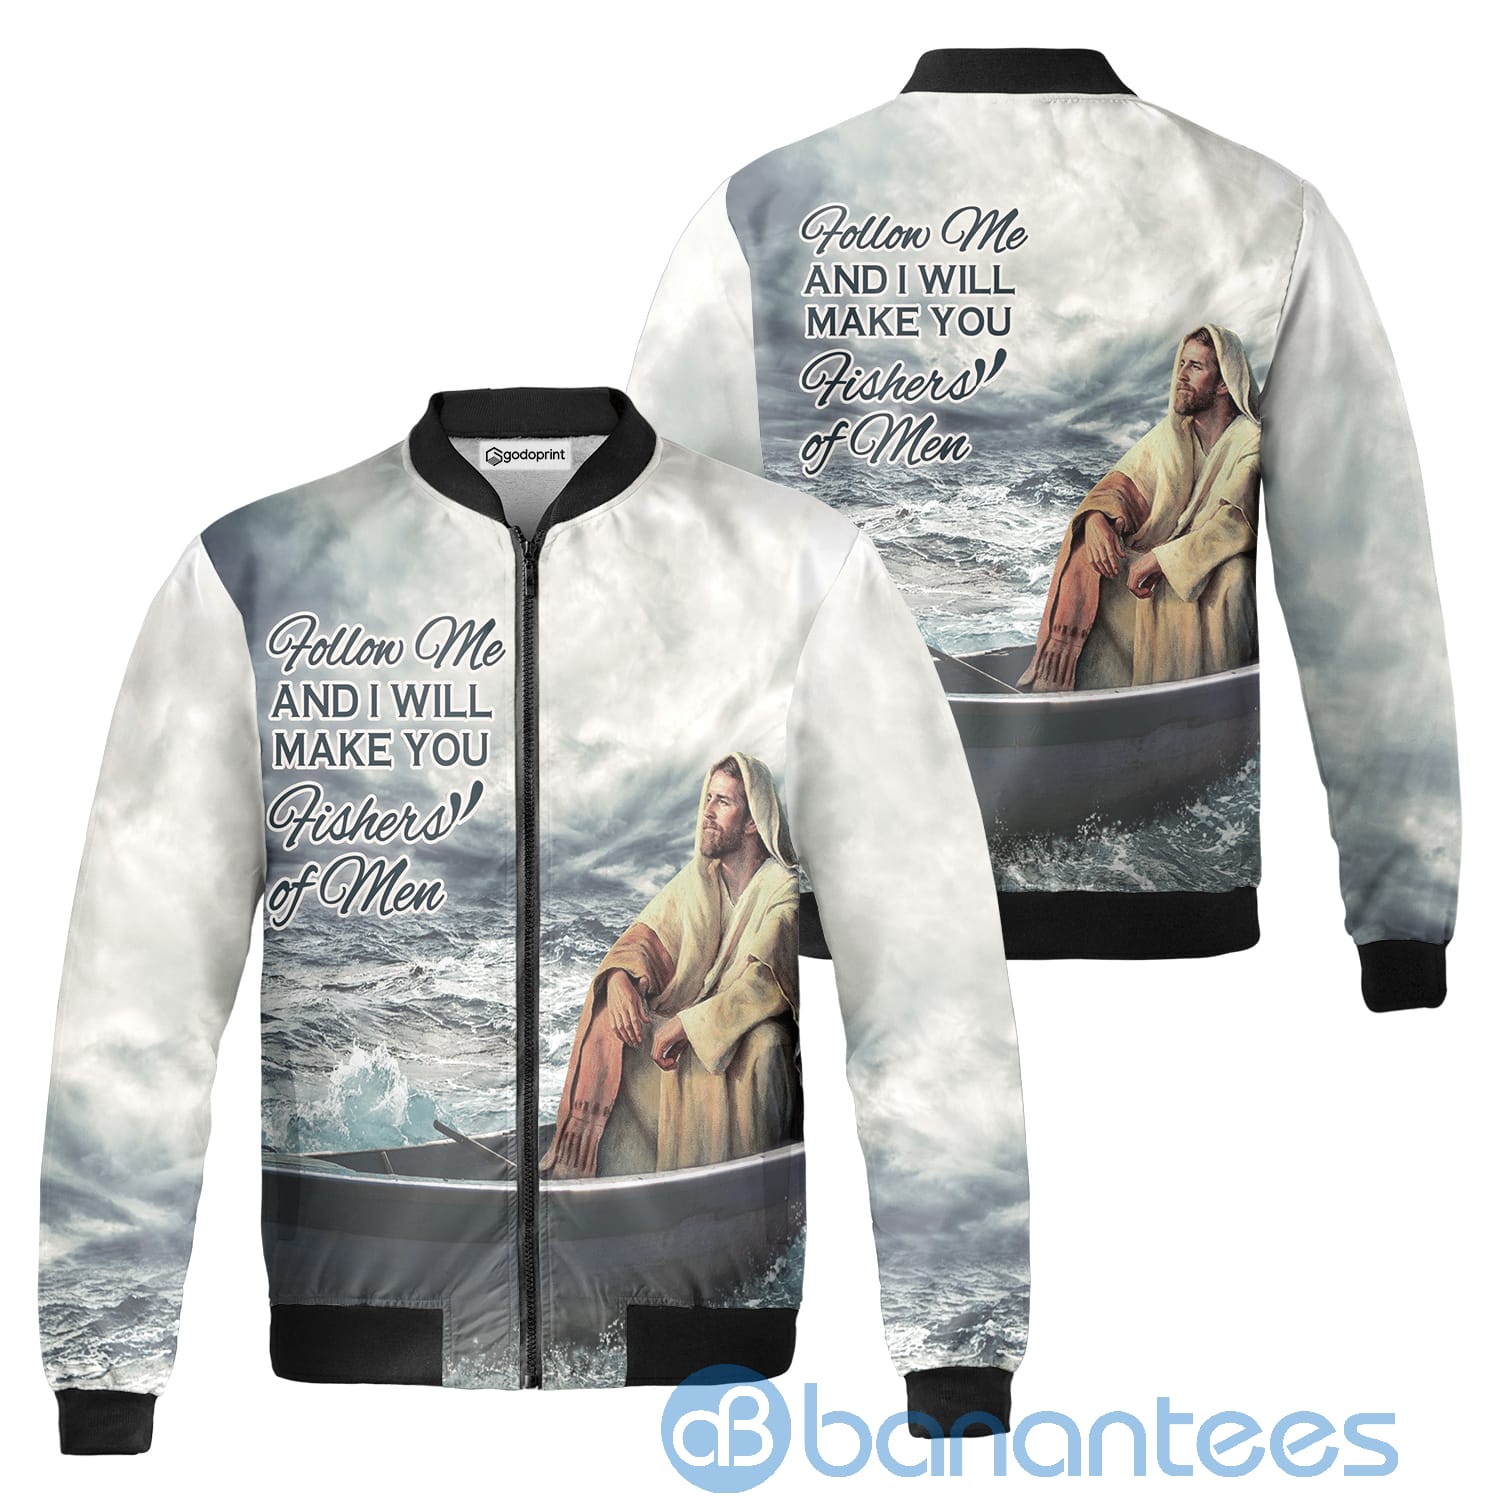 Follow Me And I Will Make You Fishers of Men Jesus Fleece Bomber Jacket